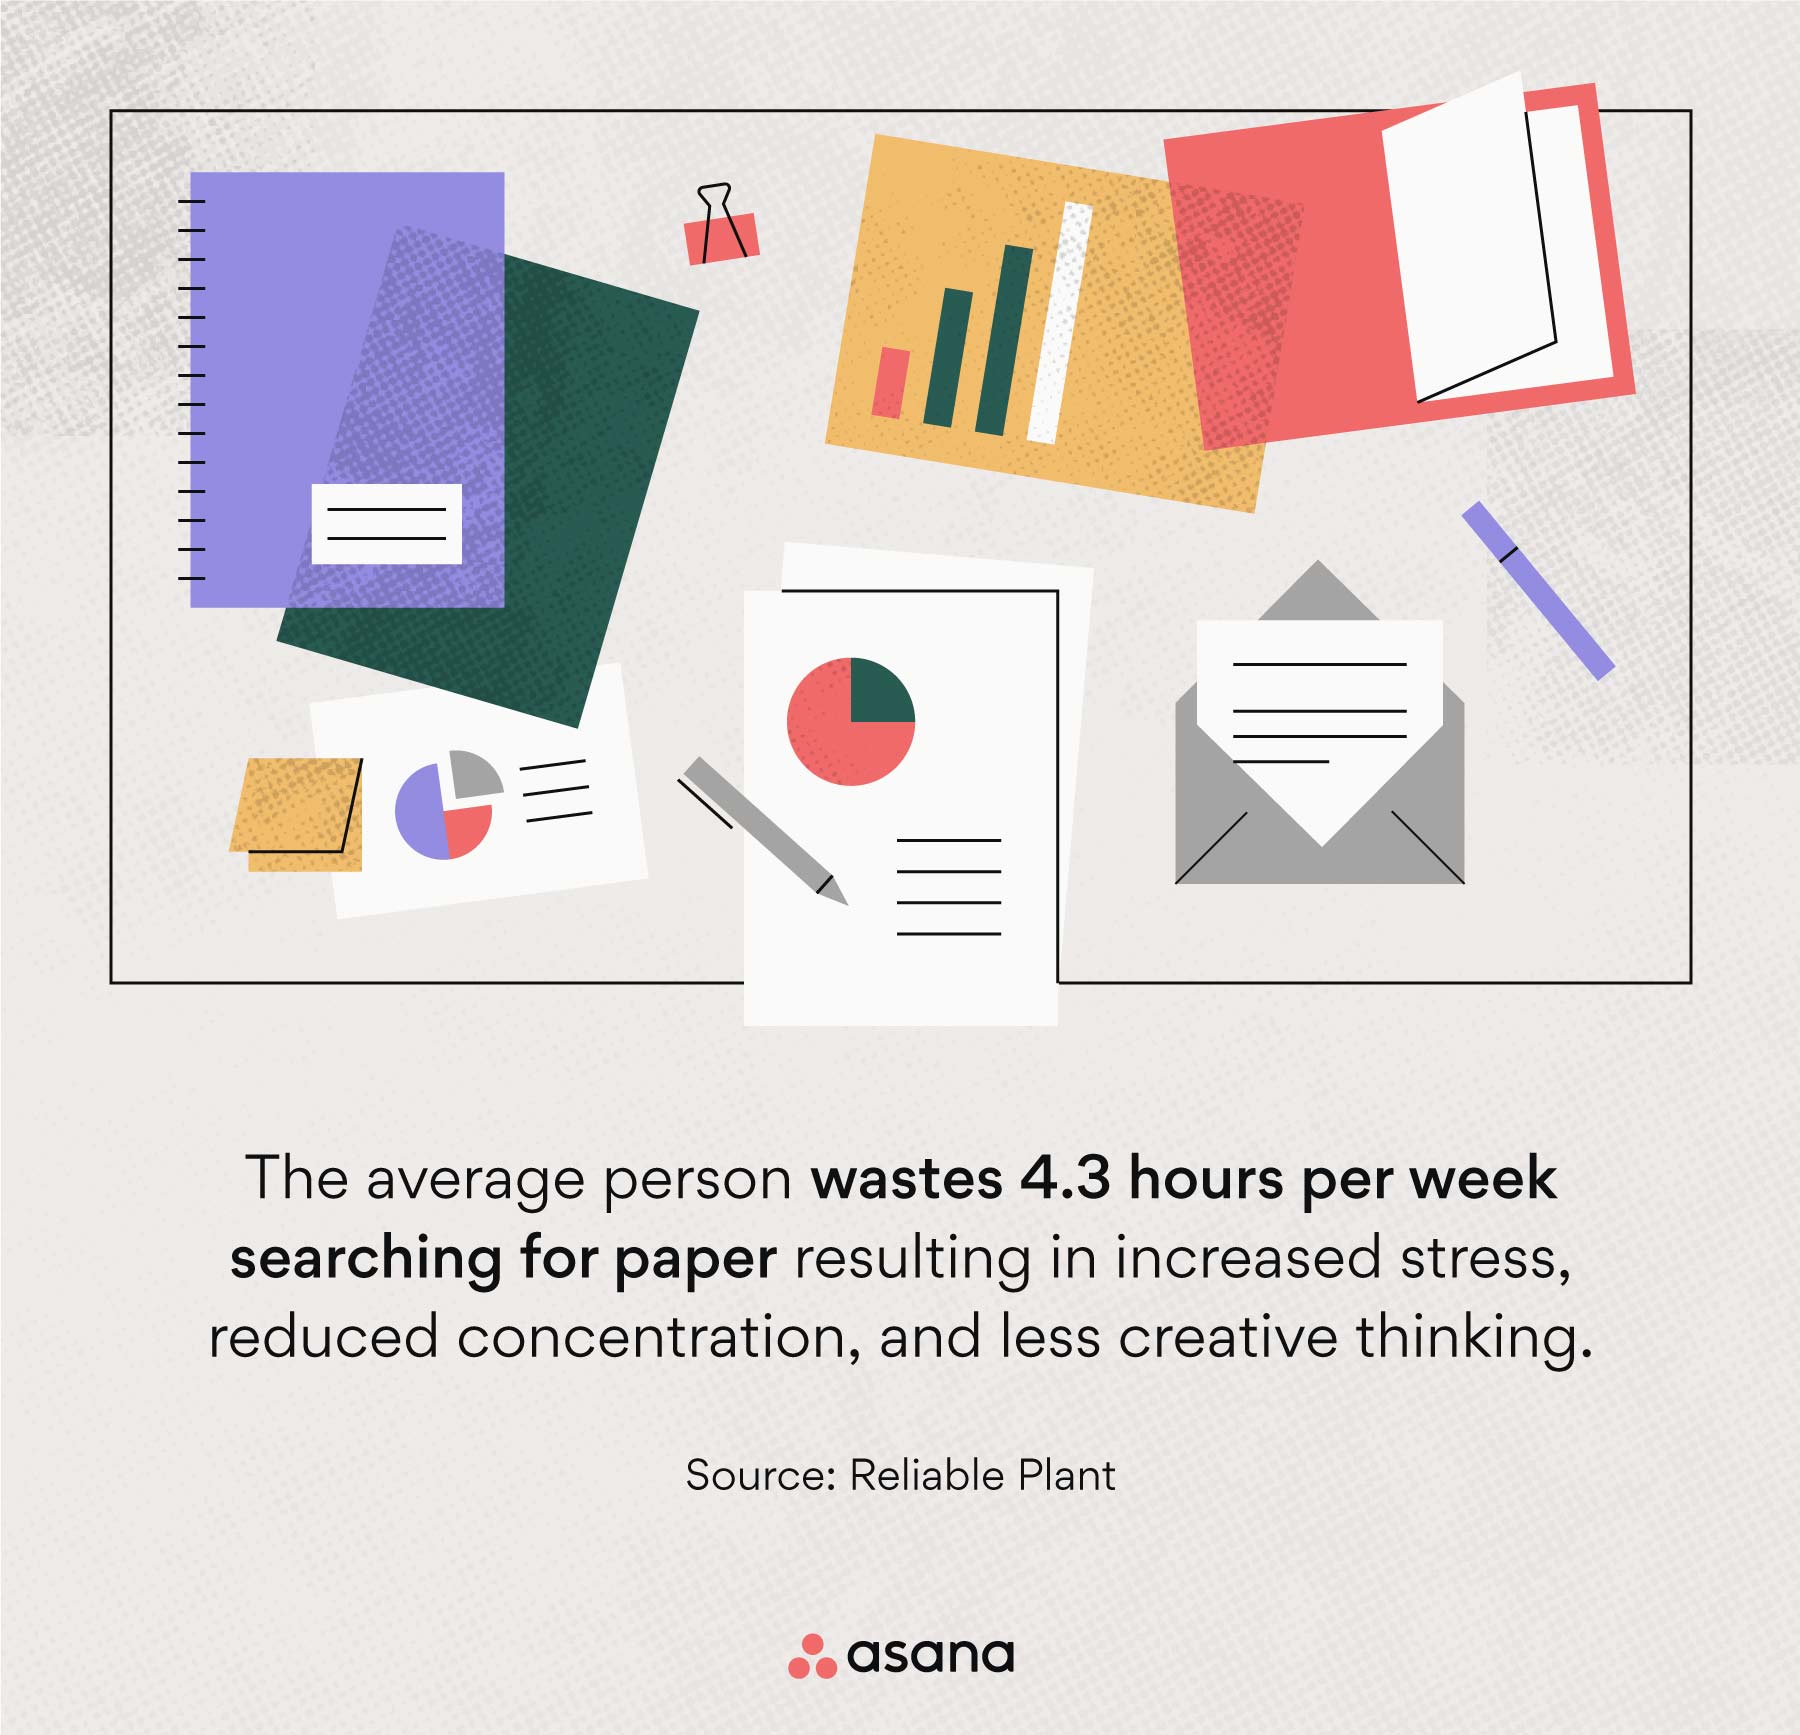 the average person wastes 4.3 hours per week searching for papers